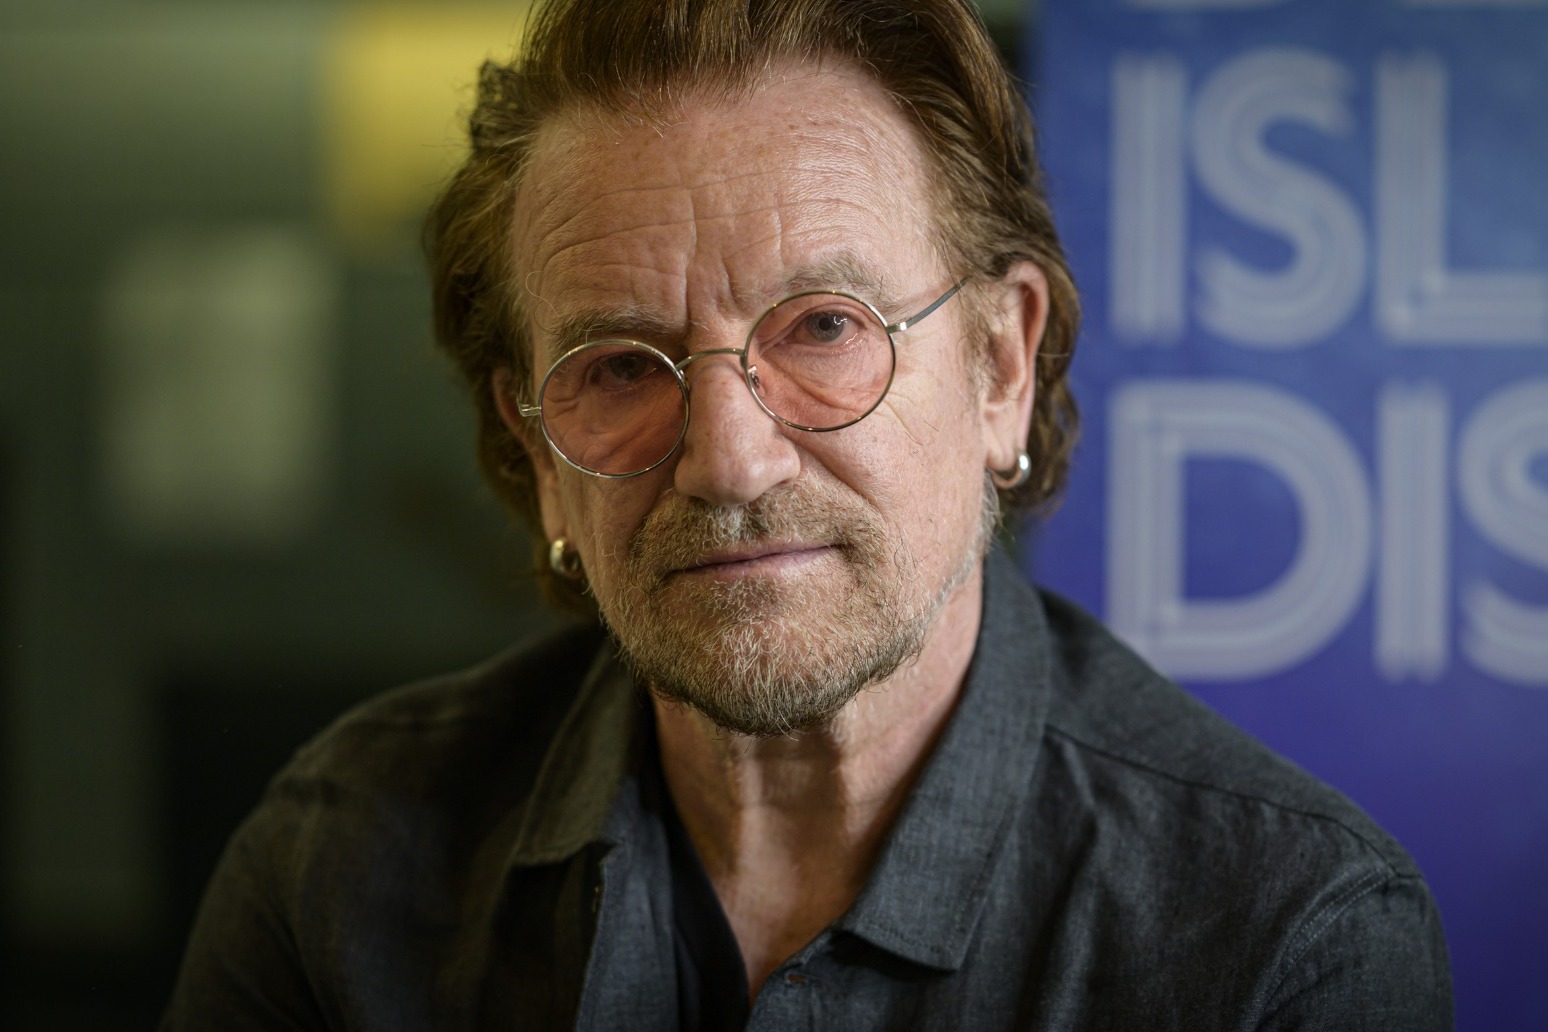 Bono calls on the UK to ‘lead’ the world again 